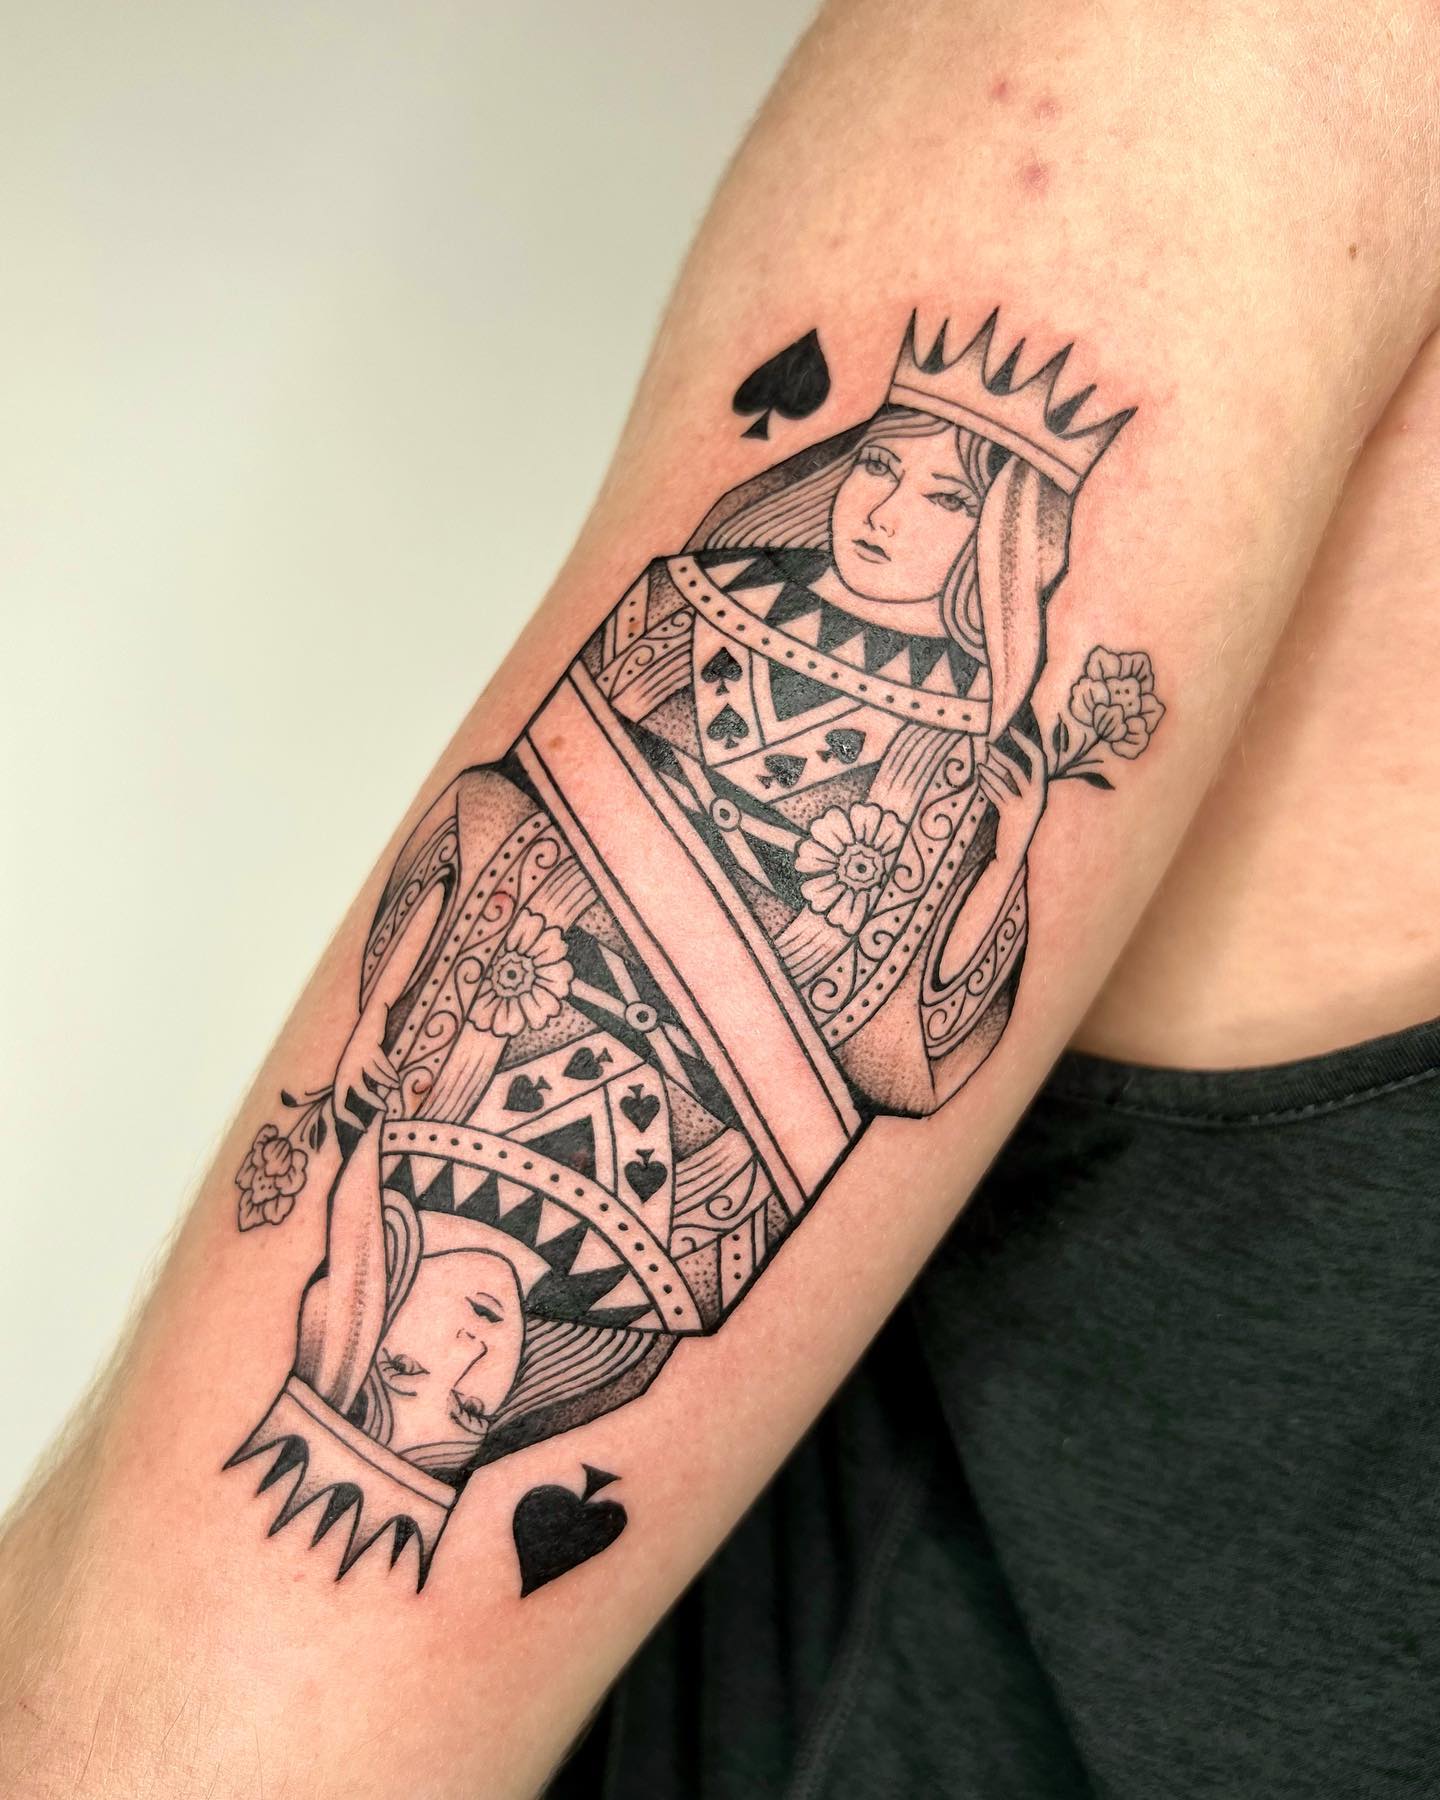 All puffy and red but I poked a lil King of spades for a friend   rsticknpokes